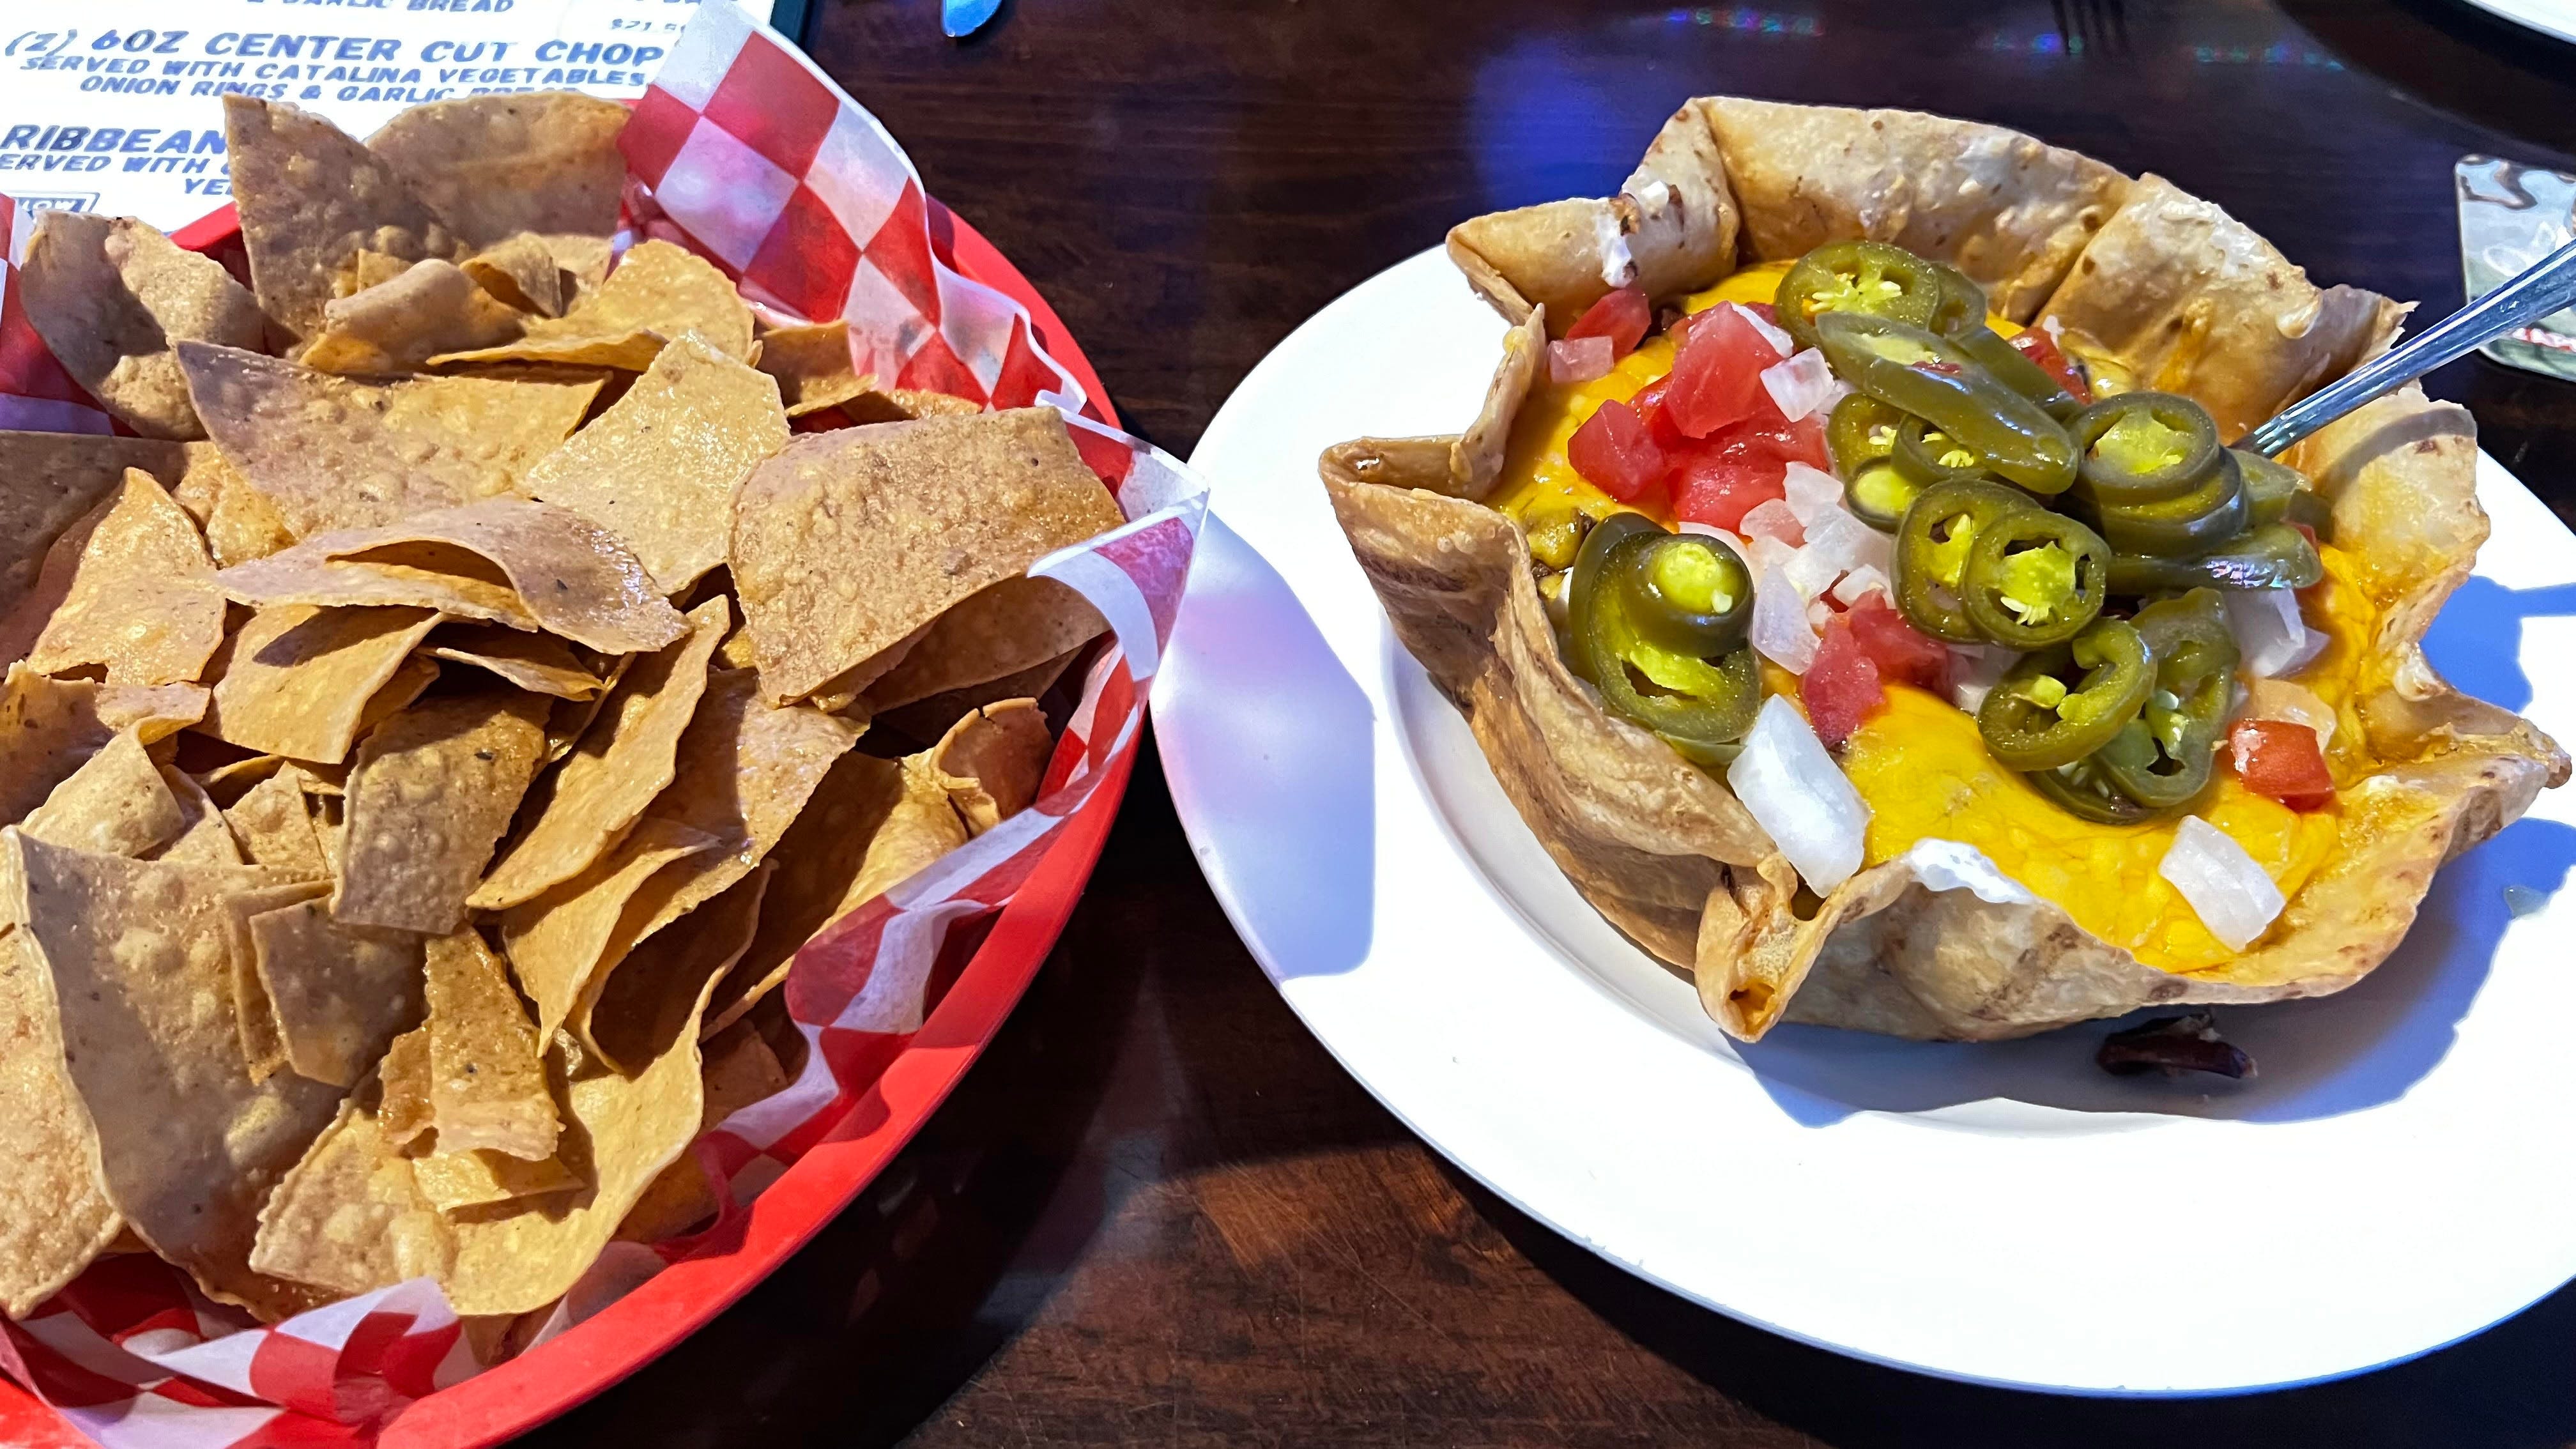 Review: Sports bar extraordinaire is lively neighborhood bar and grill with great burgers